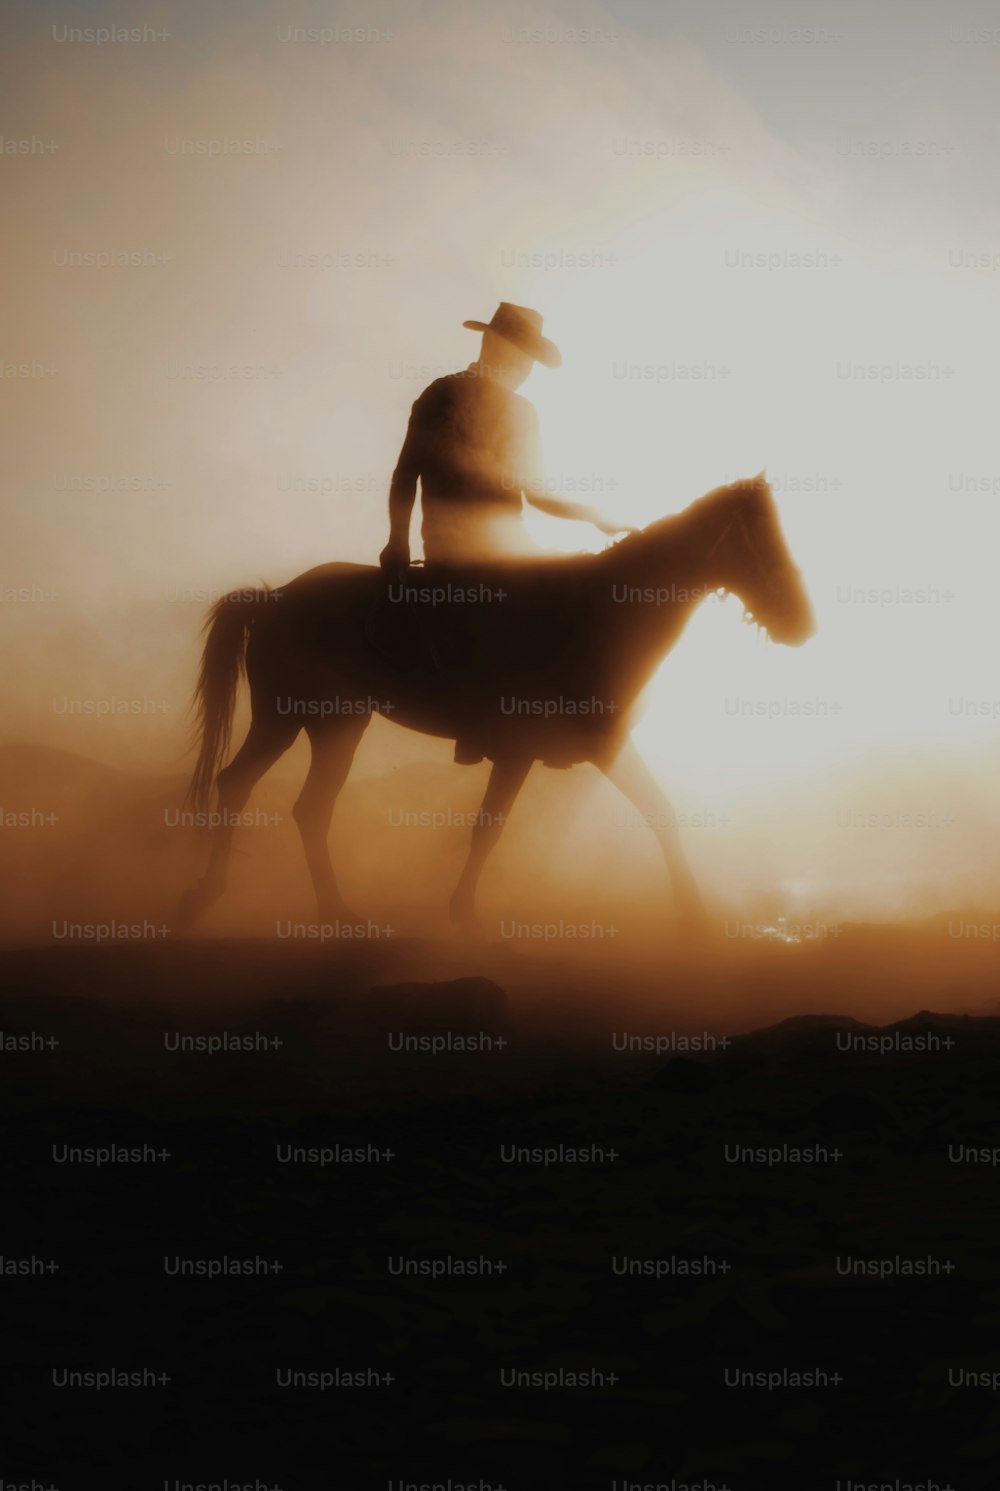 a silhouette of a man riding a horse